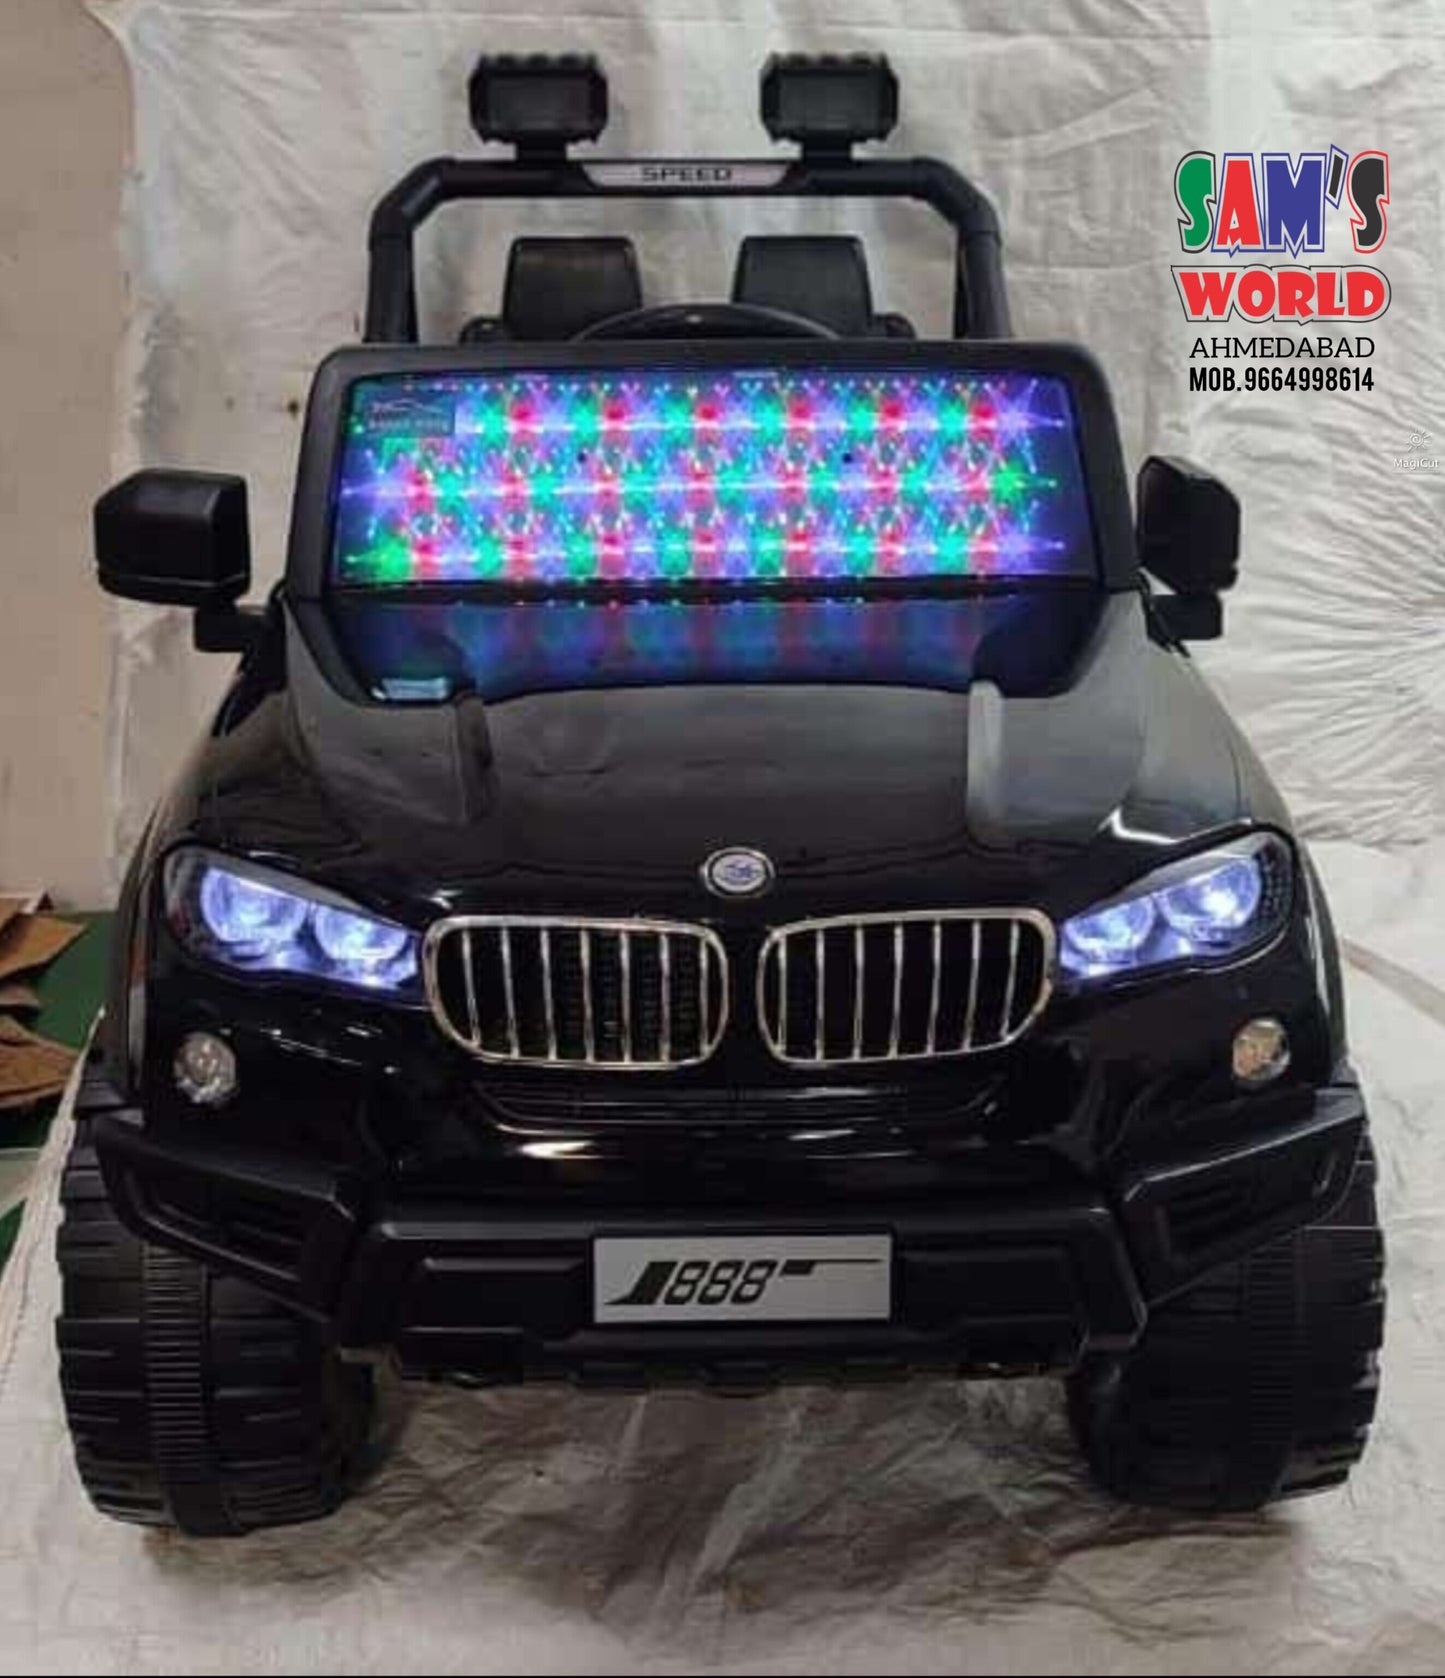 Ride-On Car 12V Rechargeable Battery-Operated Electric bmw Speed Jeep For Kids samstoy.in Sams toy world Ahmedabad 